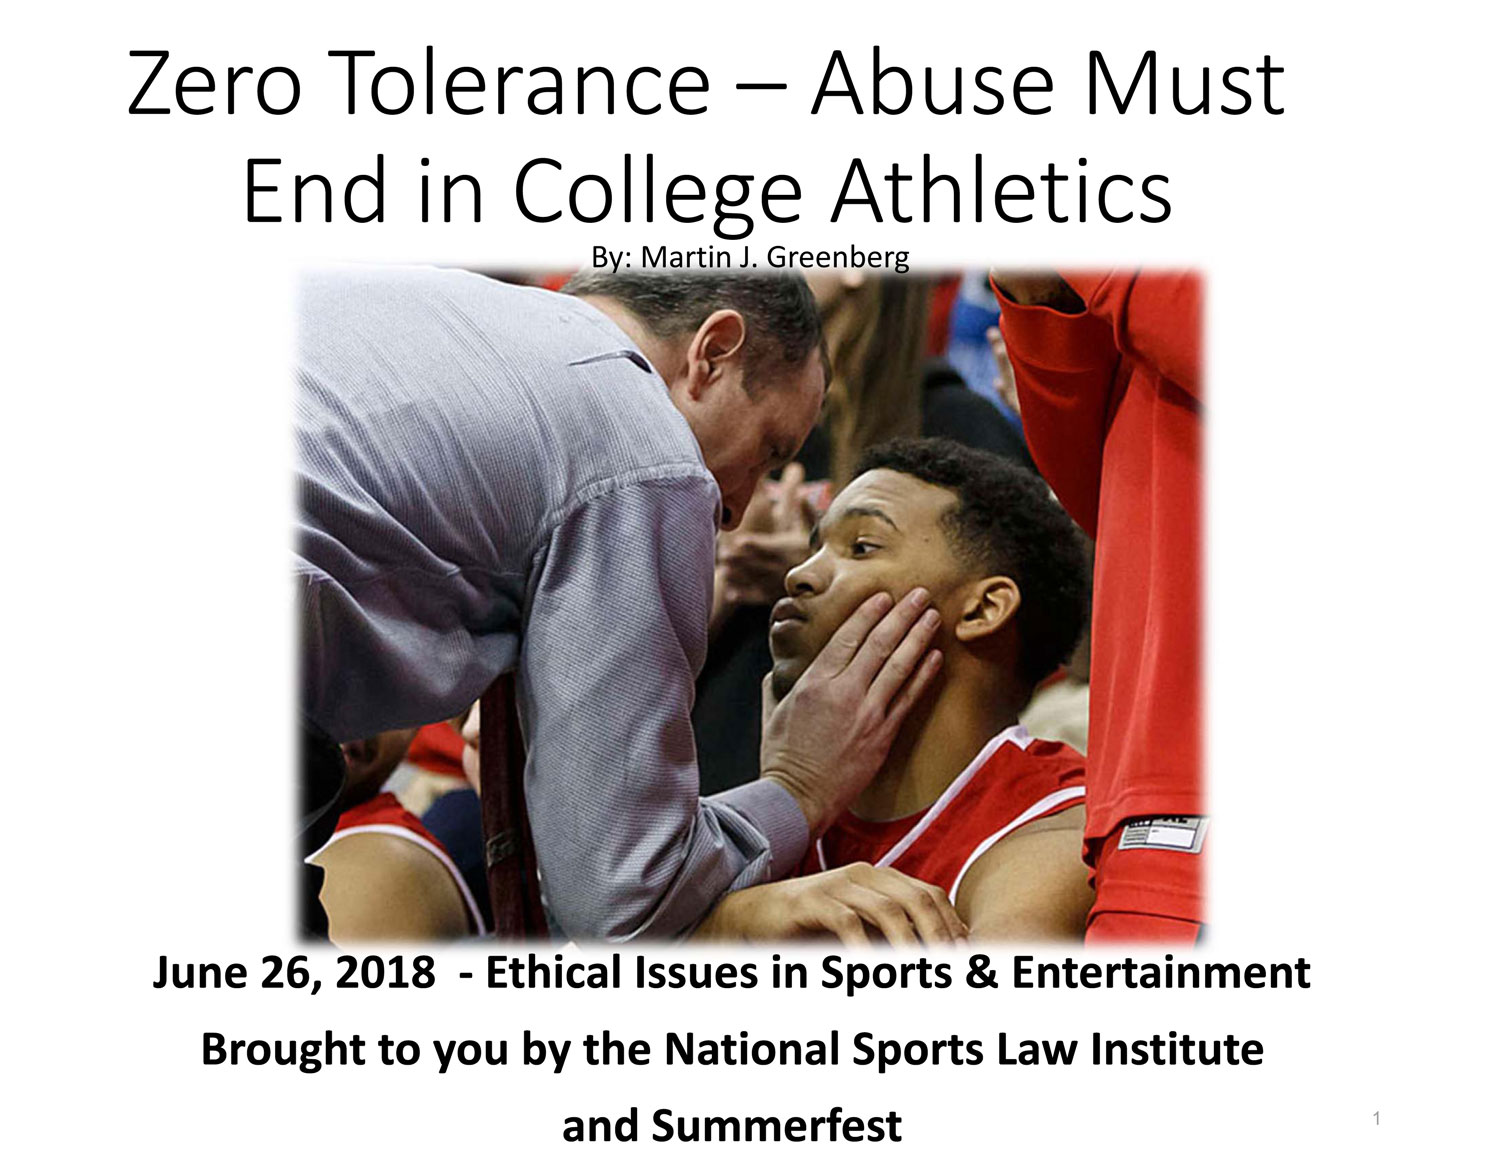 June 26, 2018 - Ethical Issues in Sports & Entertainment | Martin J. Greenberg